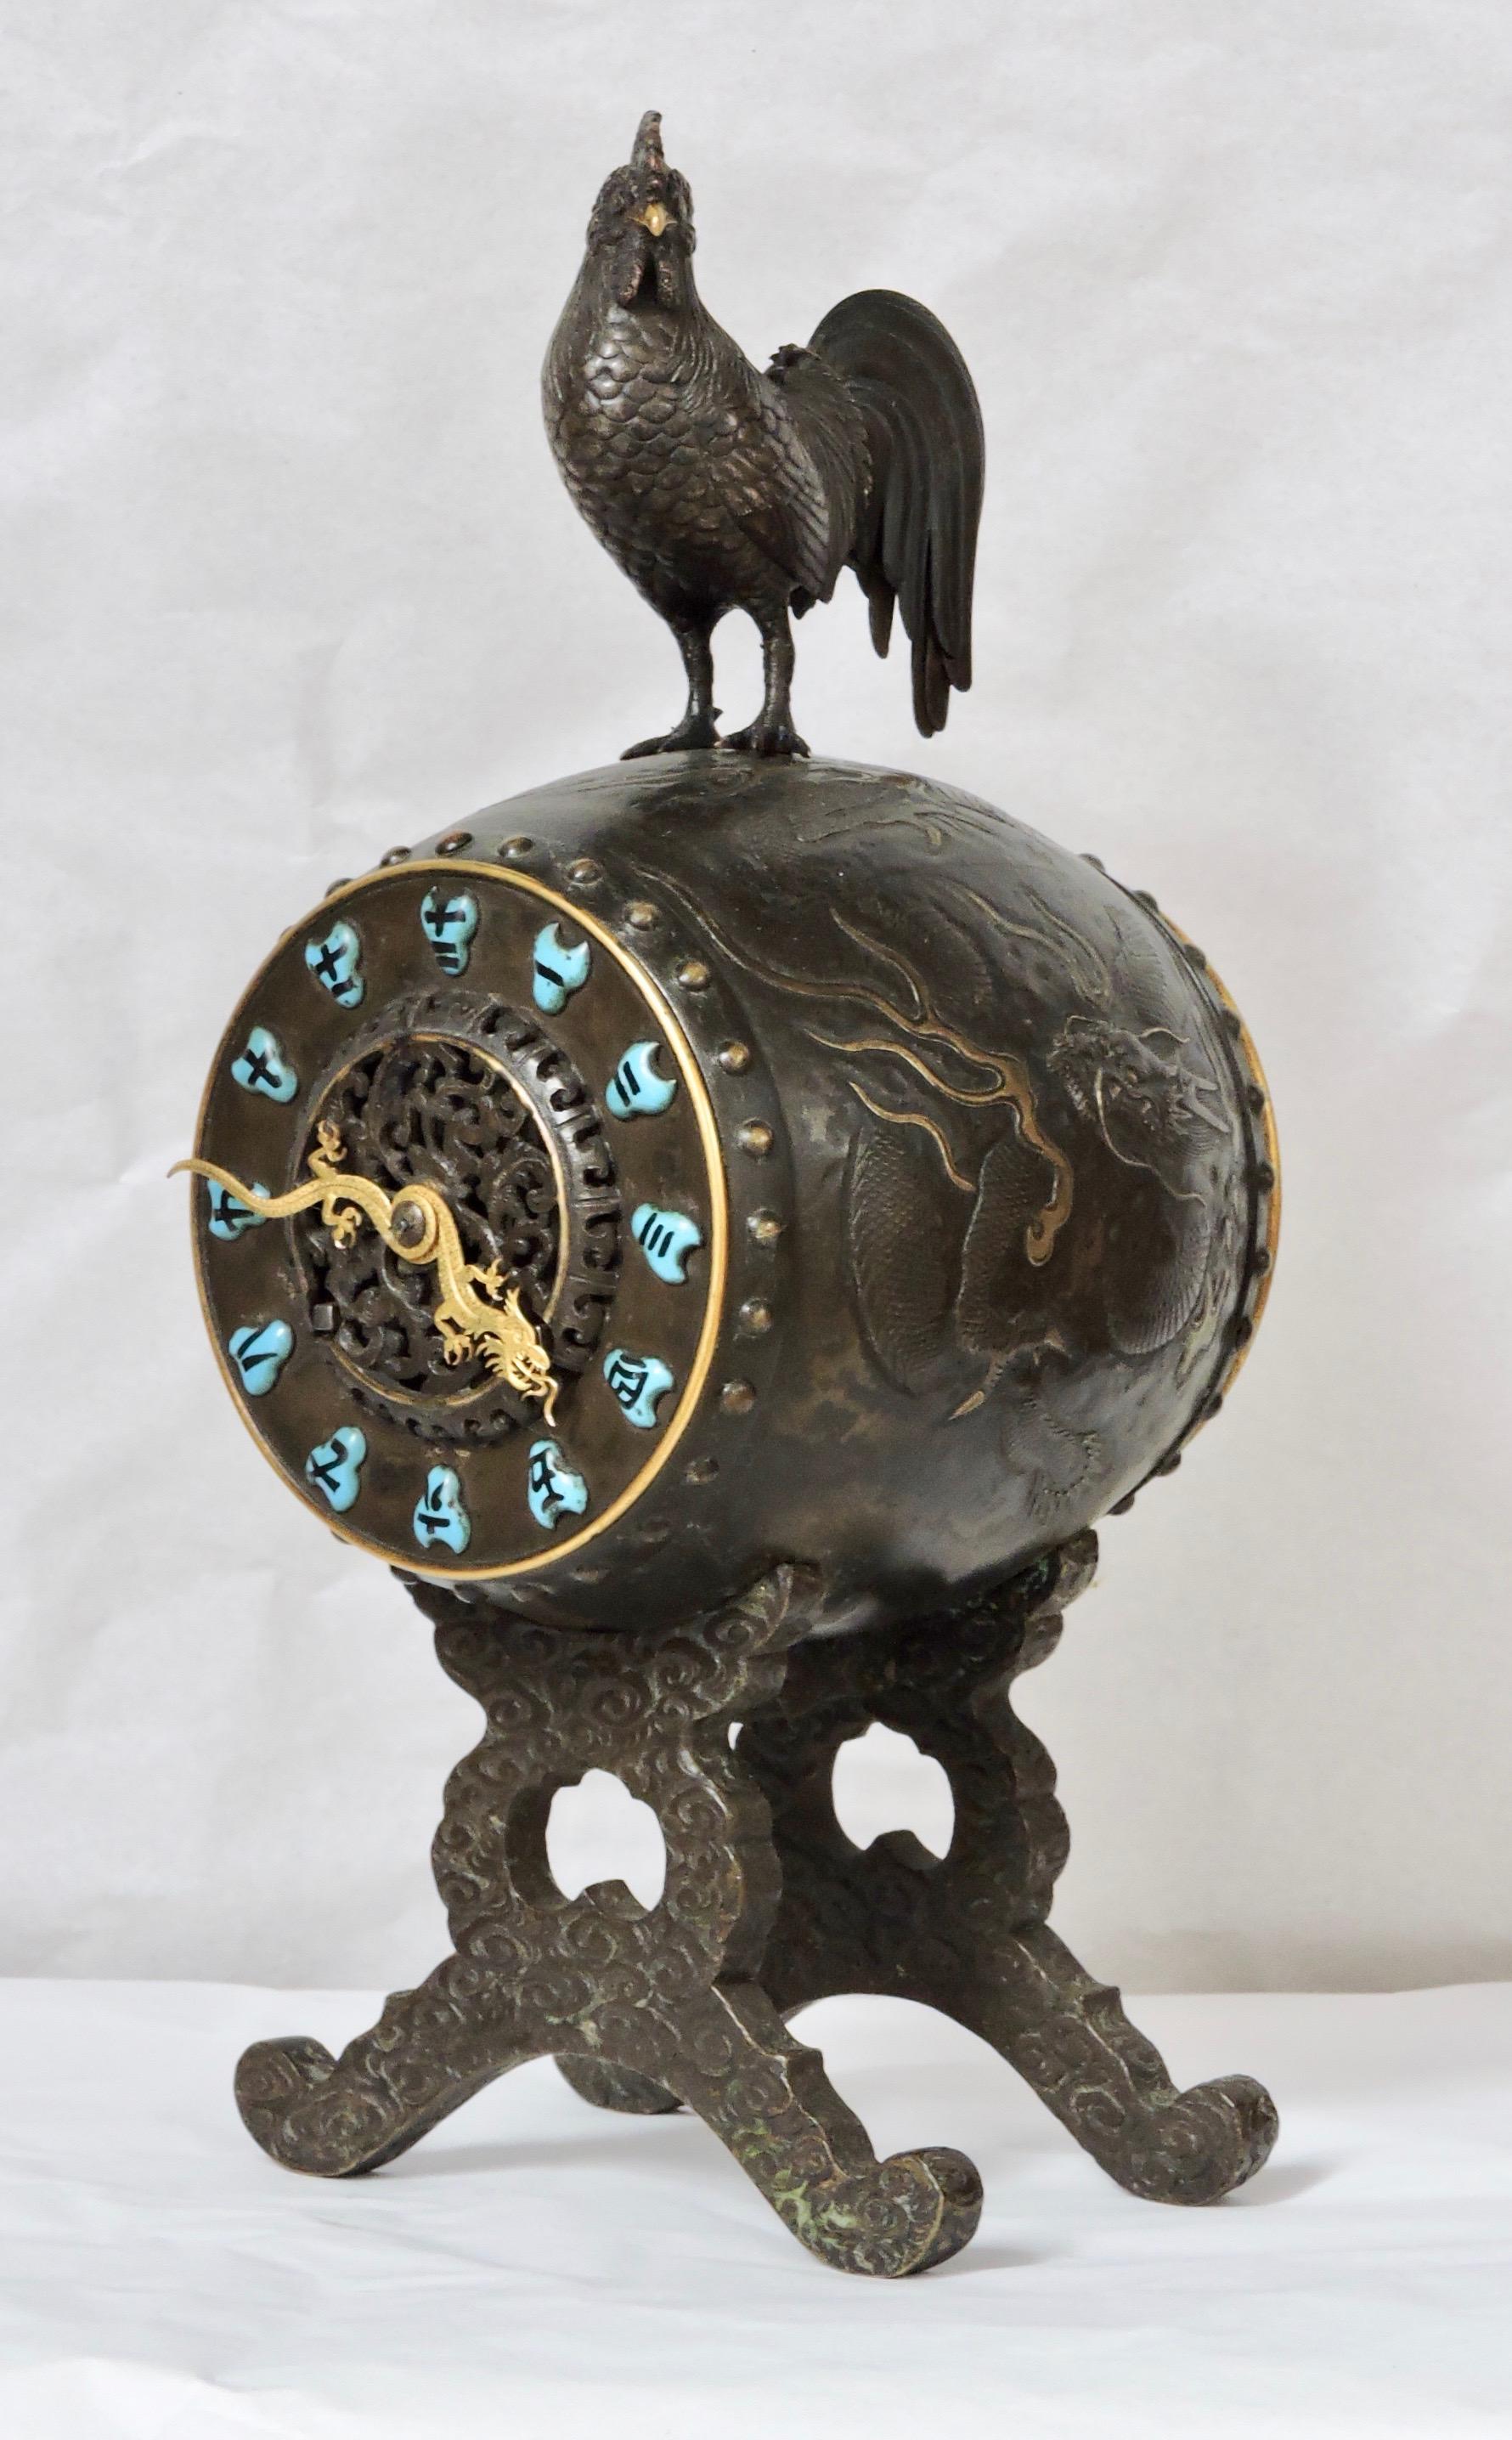 A very fine bronze brown and gilt patina French 19th century timepiece in the oriental Chinese taste.
In an Archaic style bell with molded relief dragons circling body, surmounted by a rooster.
The dial in turquoise blue porcelain with Chinese